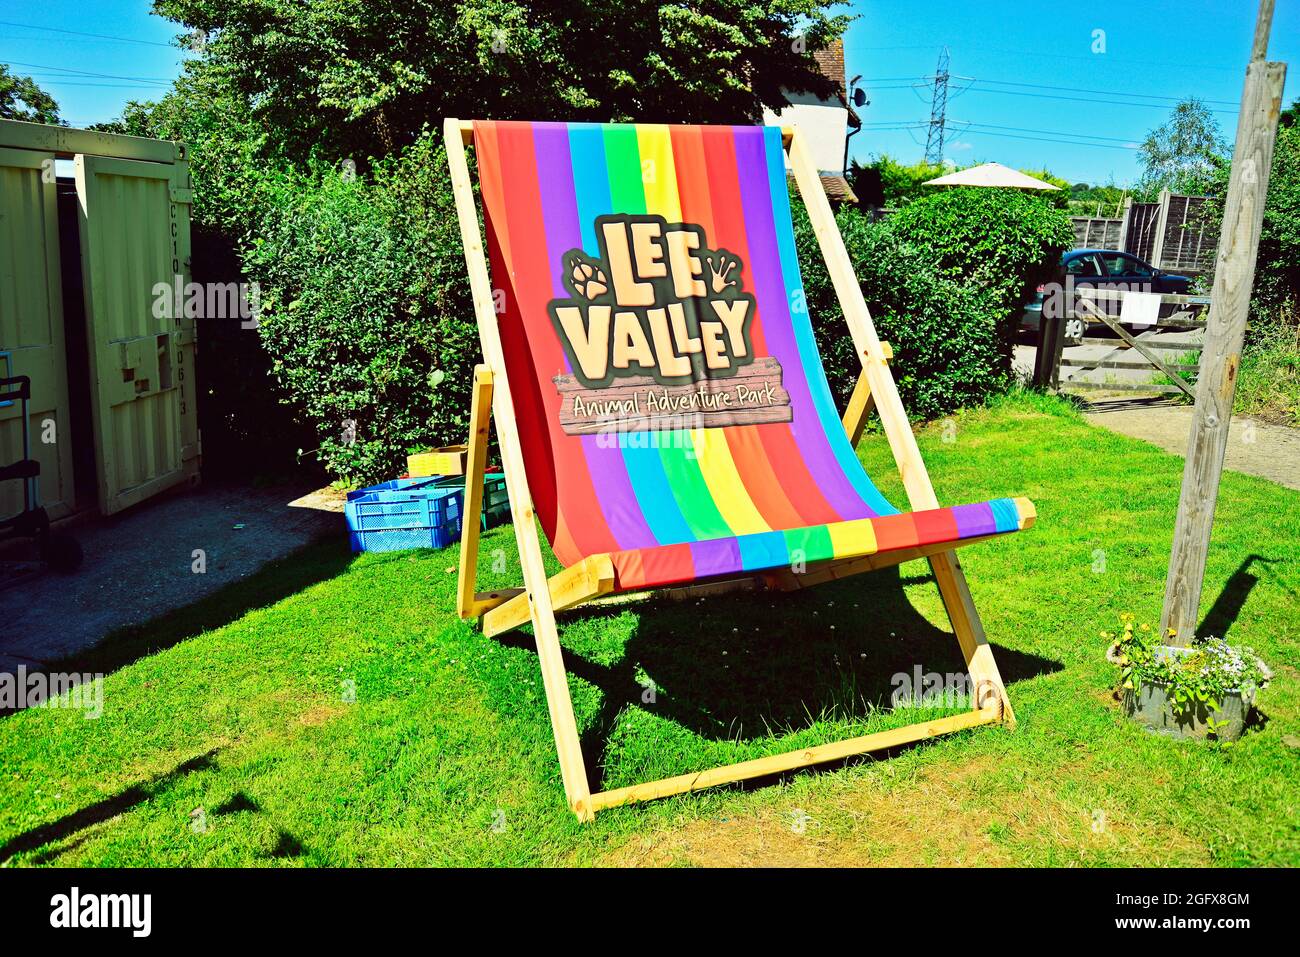 Oversized promotional chair at Lee Valley animal farm Stock Photo